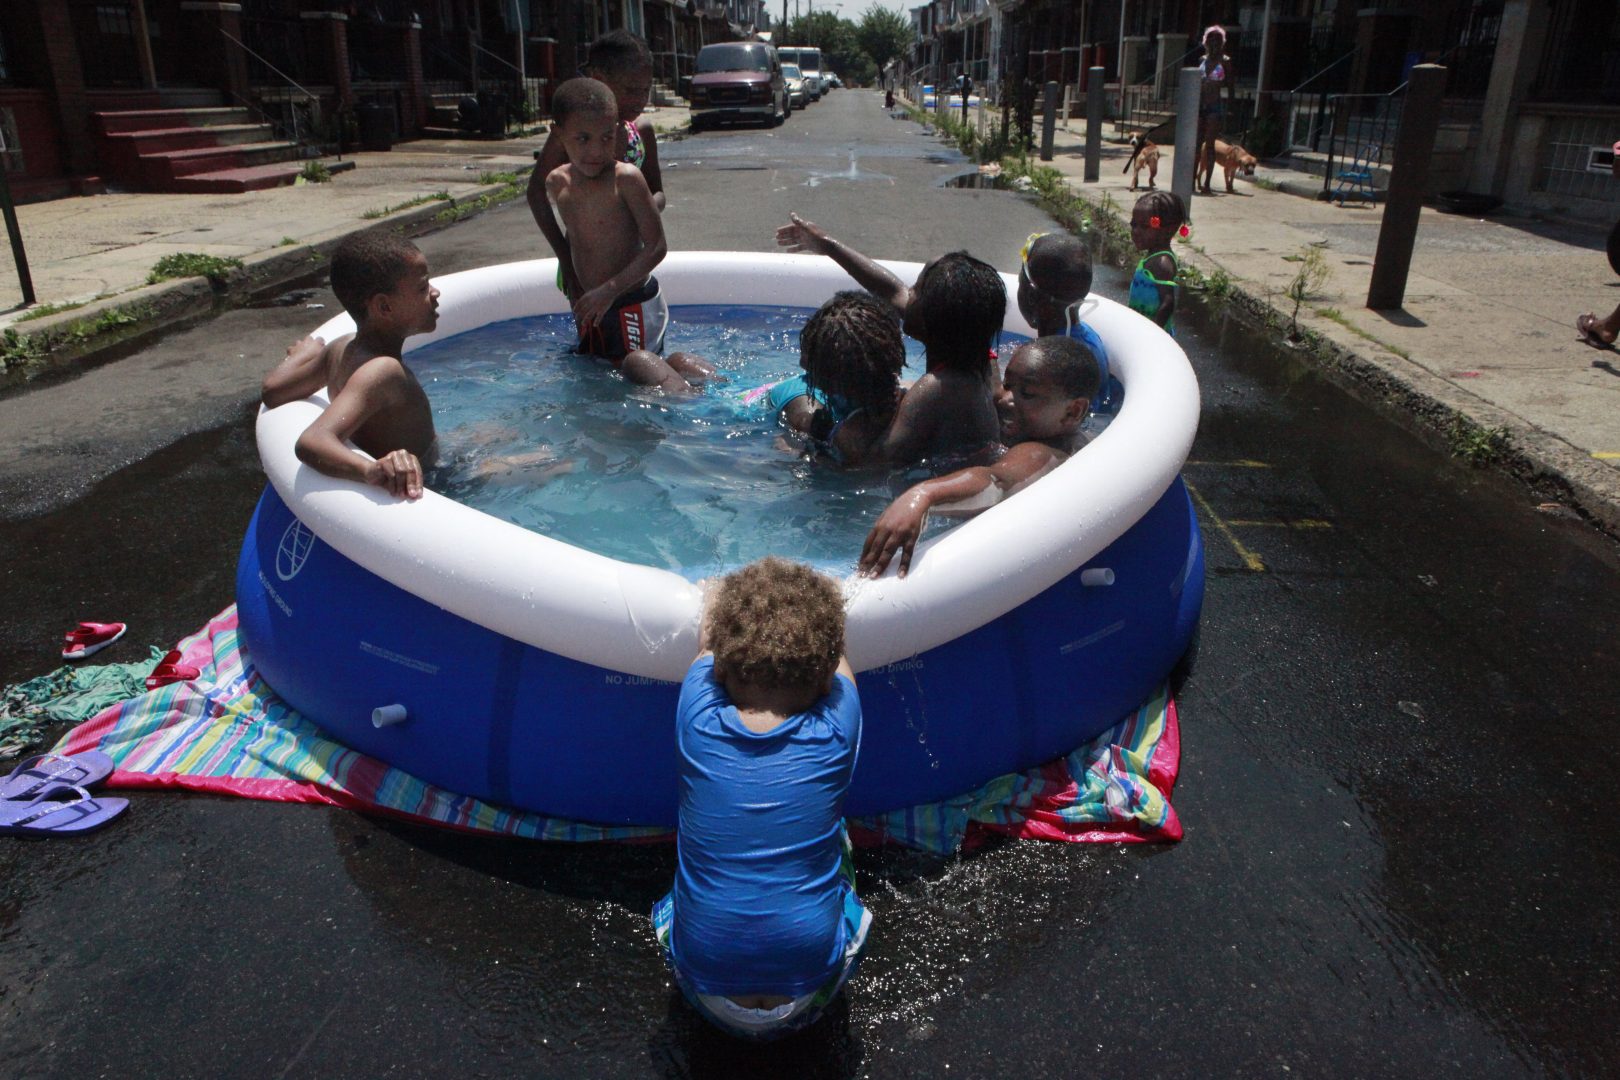 In this June 2012 photo, Michael Hall, 2, pulls down the edge of the pool while others swim  in Philadelphia. Climate change has already brought hotter weather to the state, where some areas have warmed 2 degrees in 30 years.